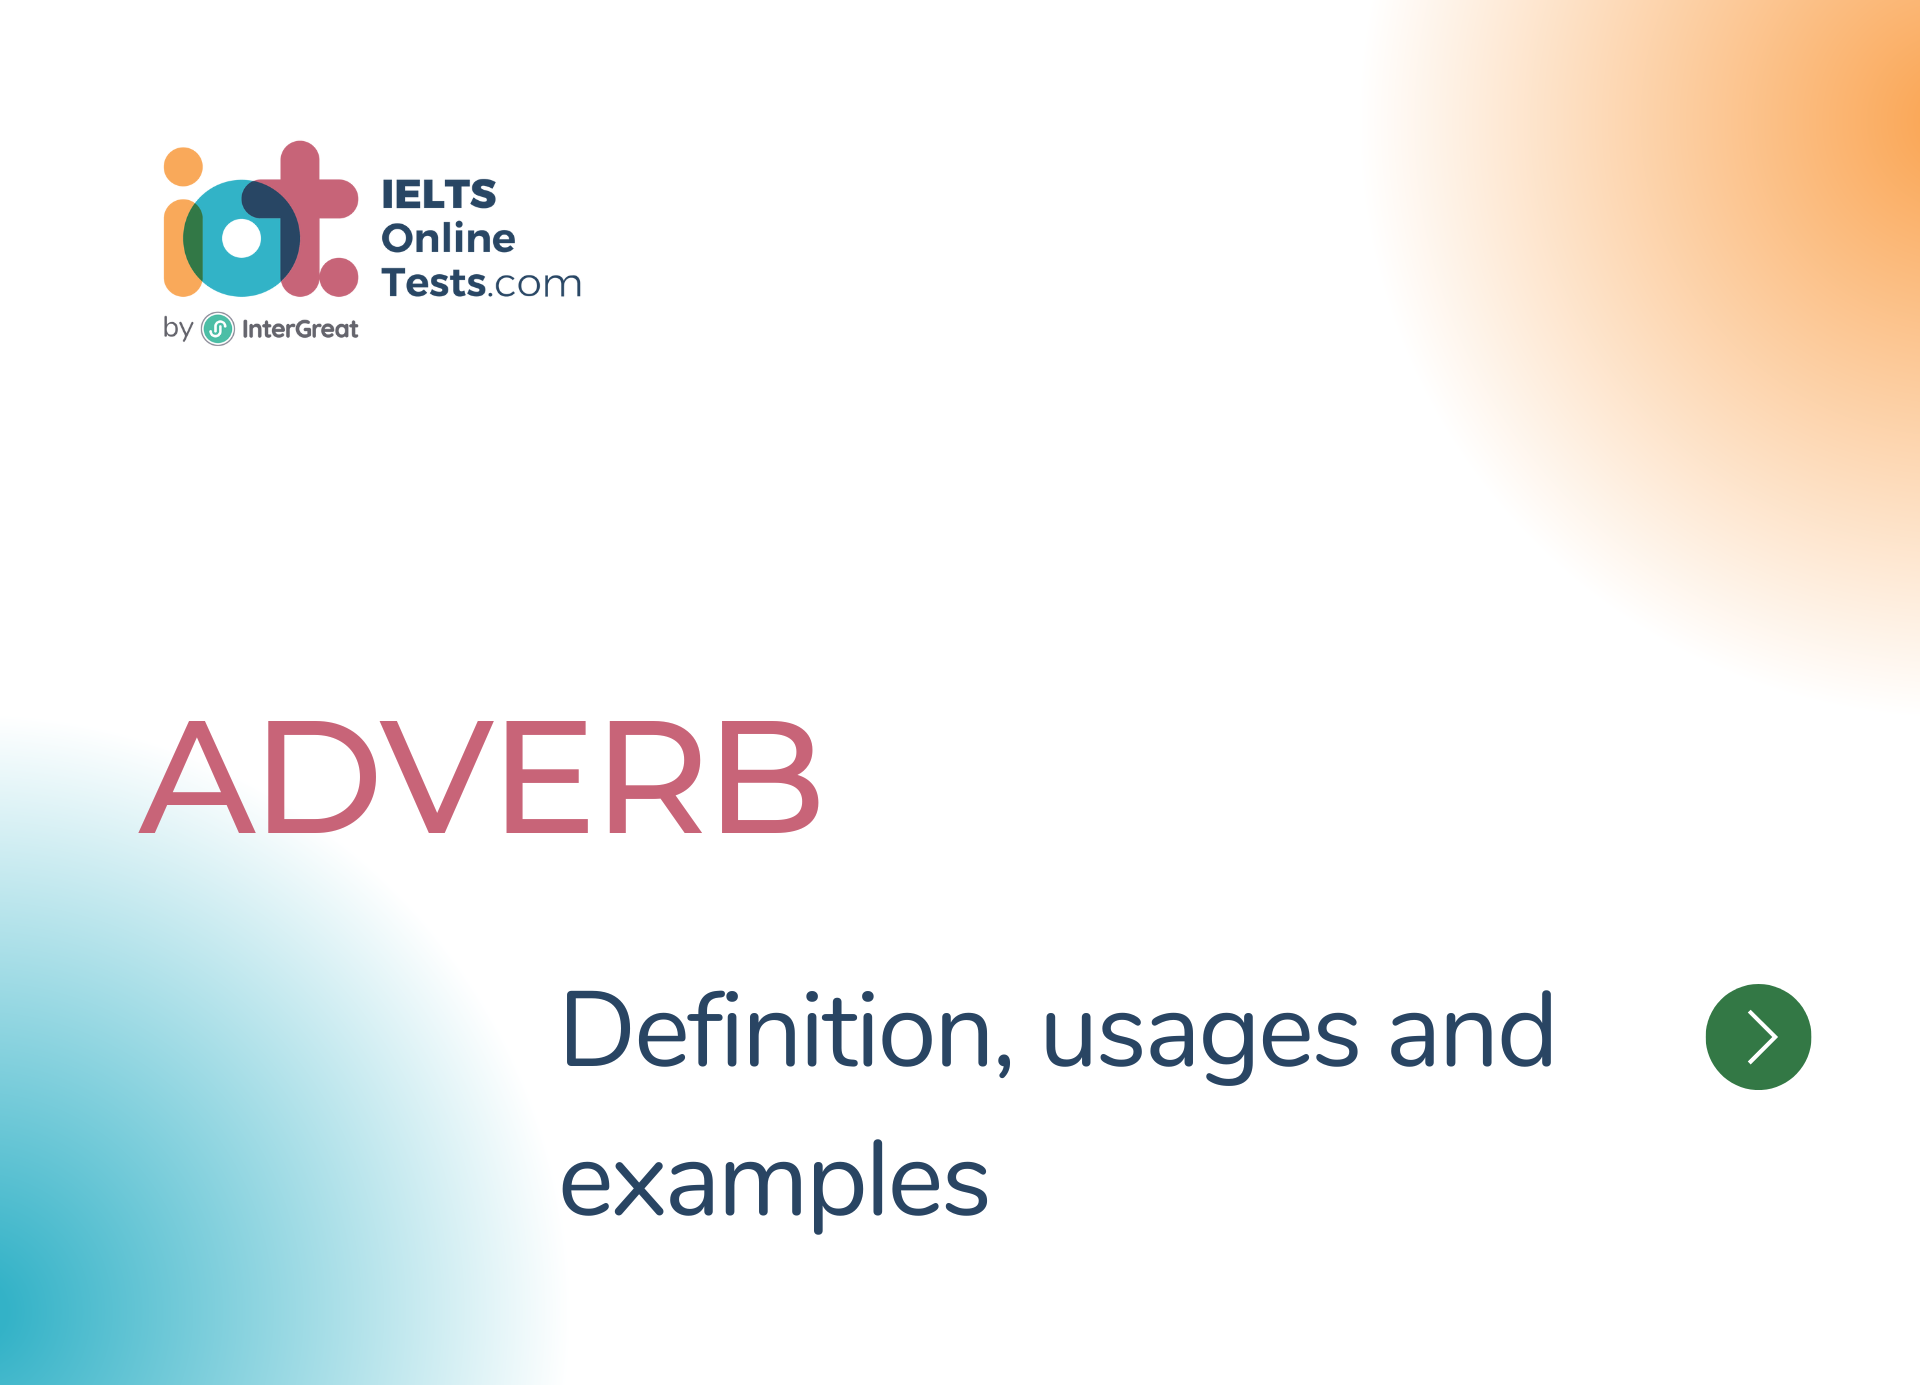 Adverb definition, usages and examples